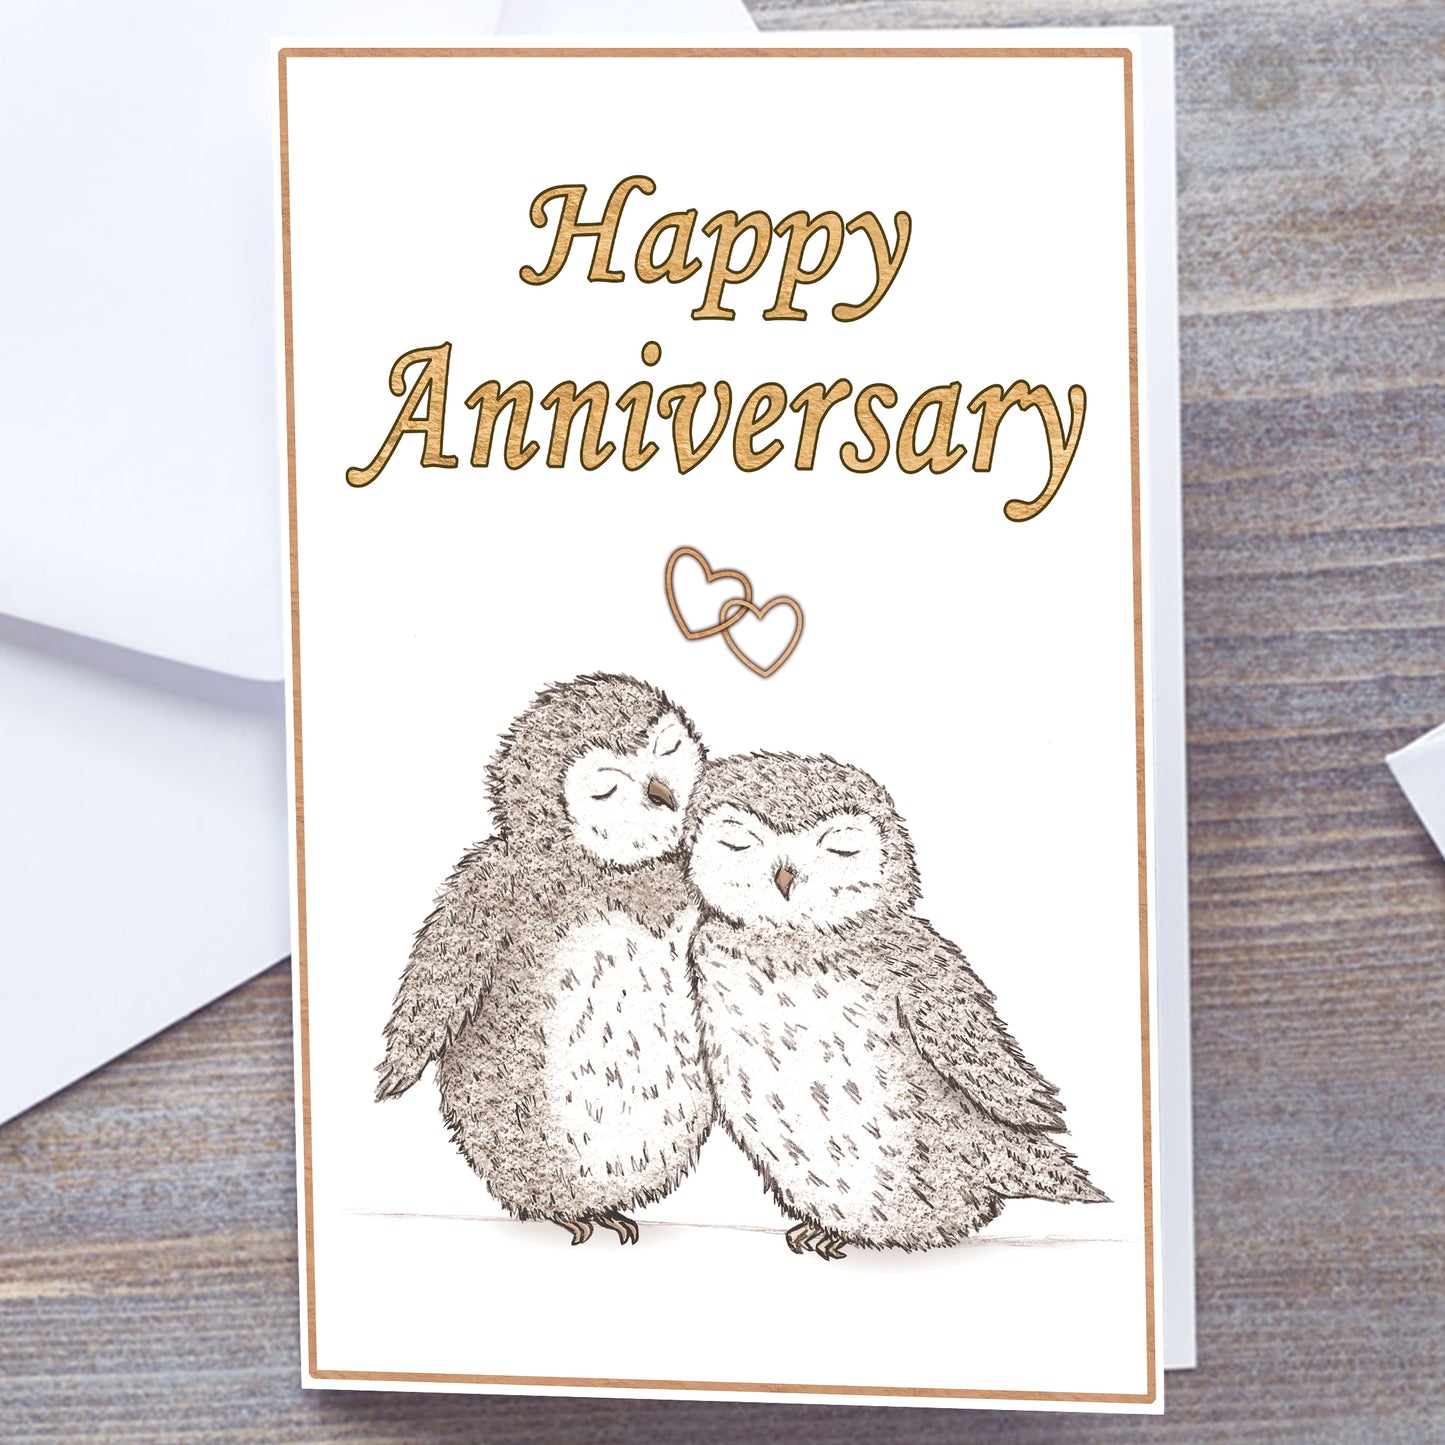 White gloss A5 Happy Anniversary Greeting card with gold text and border. Optional personalisation. Two hand-drawn fluffy grey/brown owls snuggling under interlocking gold hearts. Happy Anniversary in Gold at the top of card. Non-personalised version. Gold Wedding Anniversary Card, white envelope